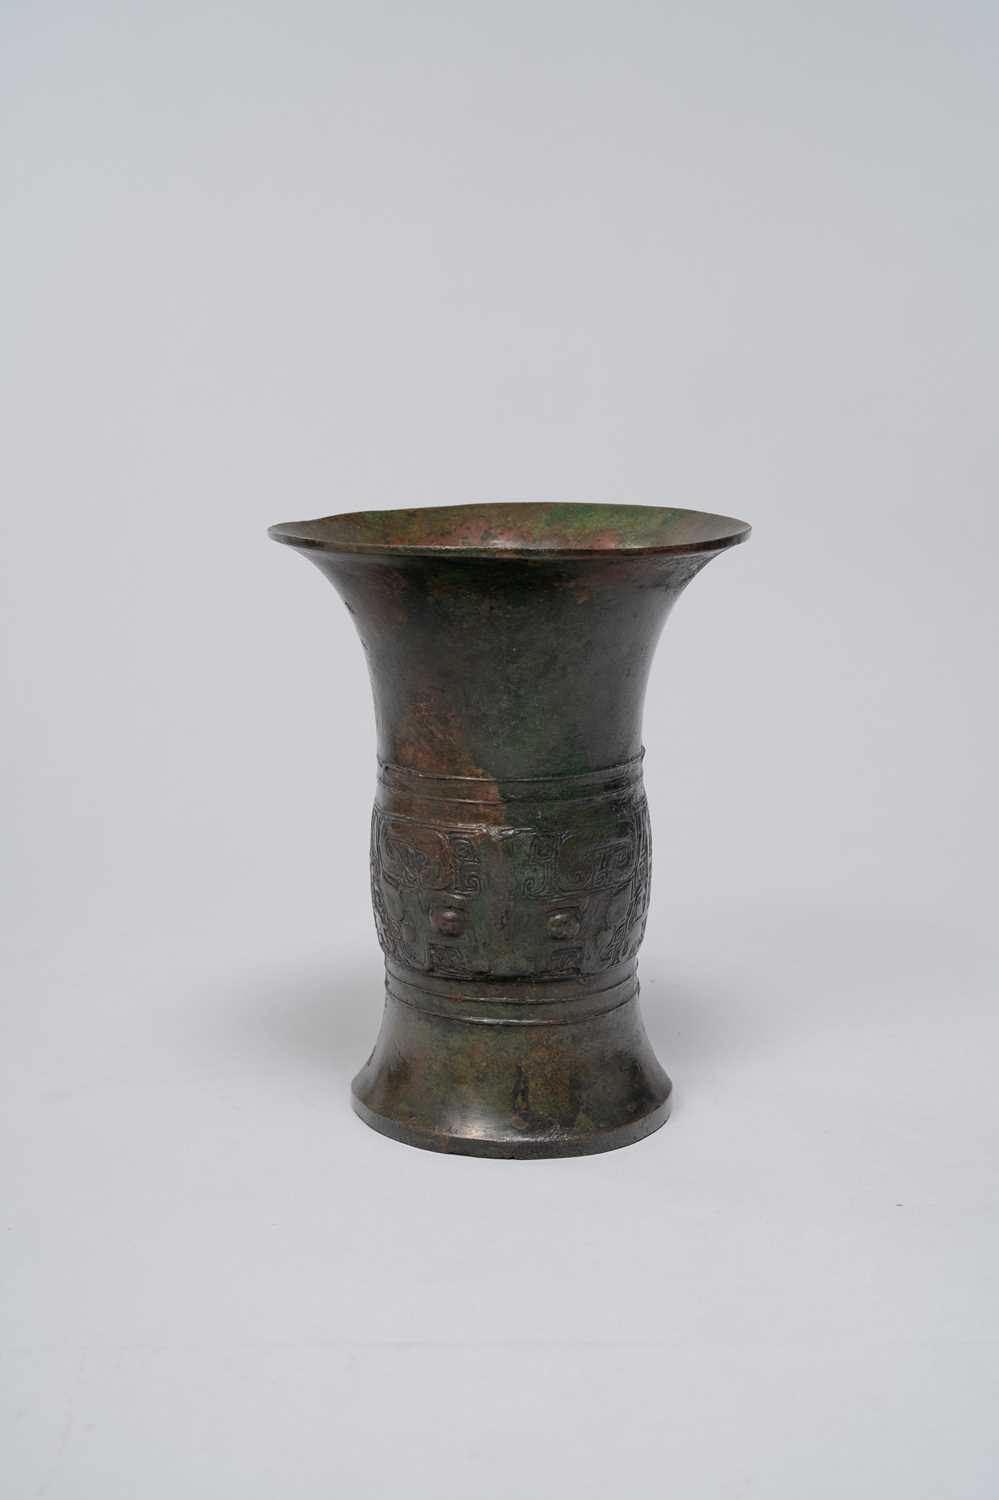 A CHINESE ARCHAIC BRONZE RITUAL WINE VESSEL, ZUN LATE SHANG/EARLY WESTERN ZHOU DYNASTY The